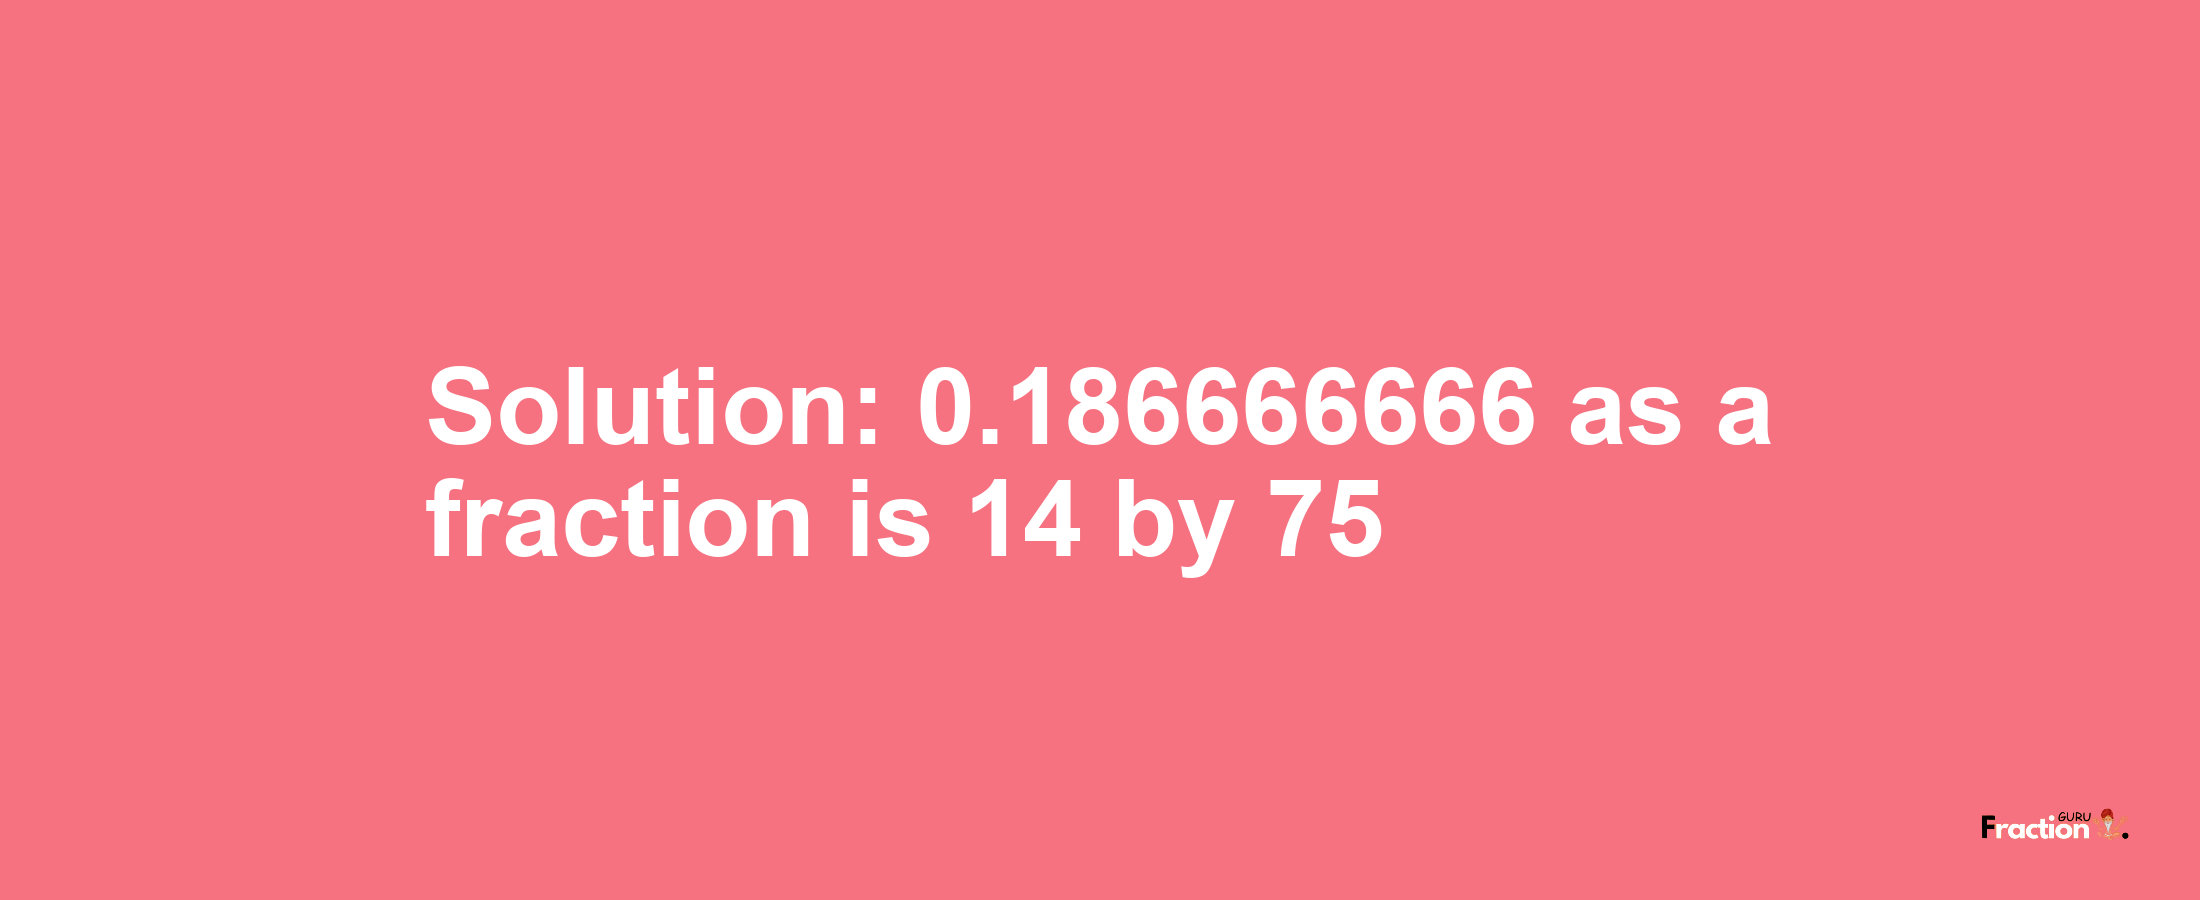 Solution:0.186666666 as a fraction is 14/75